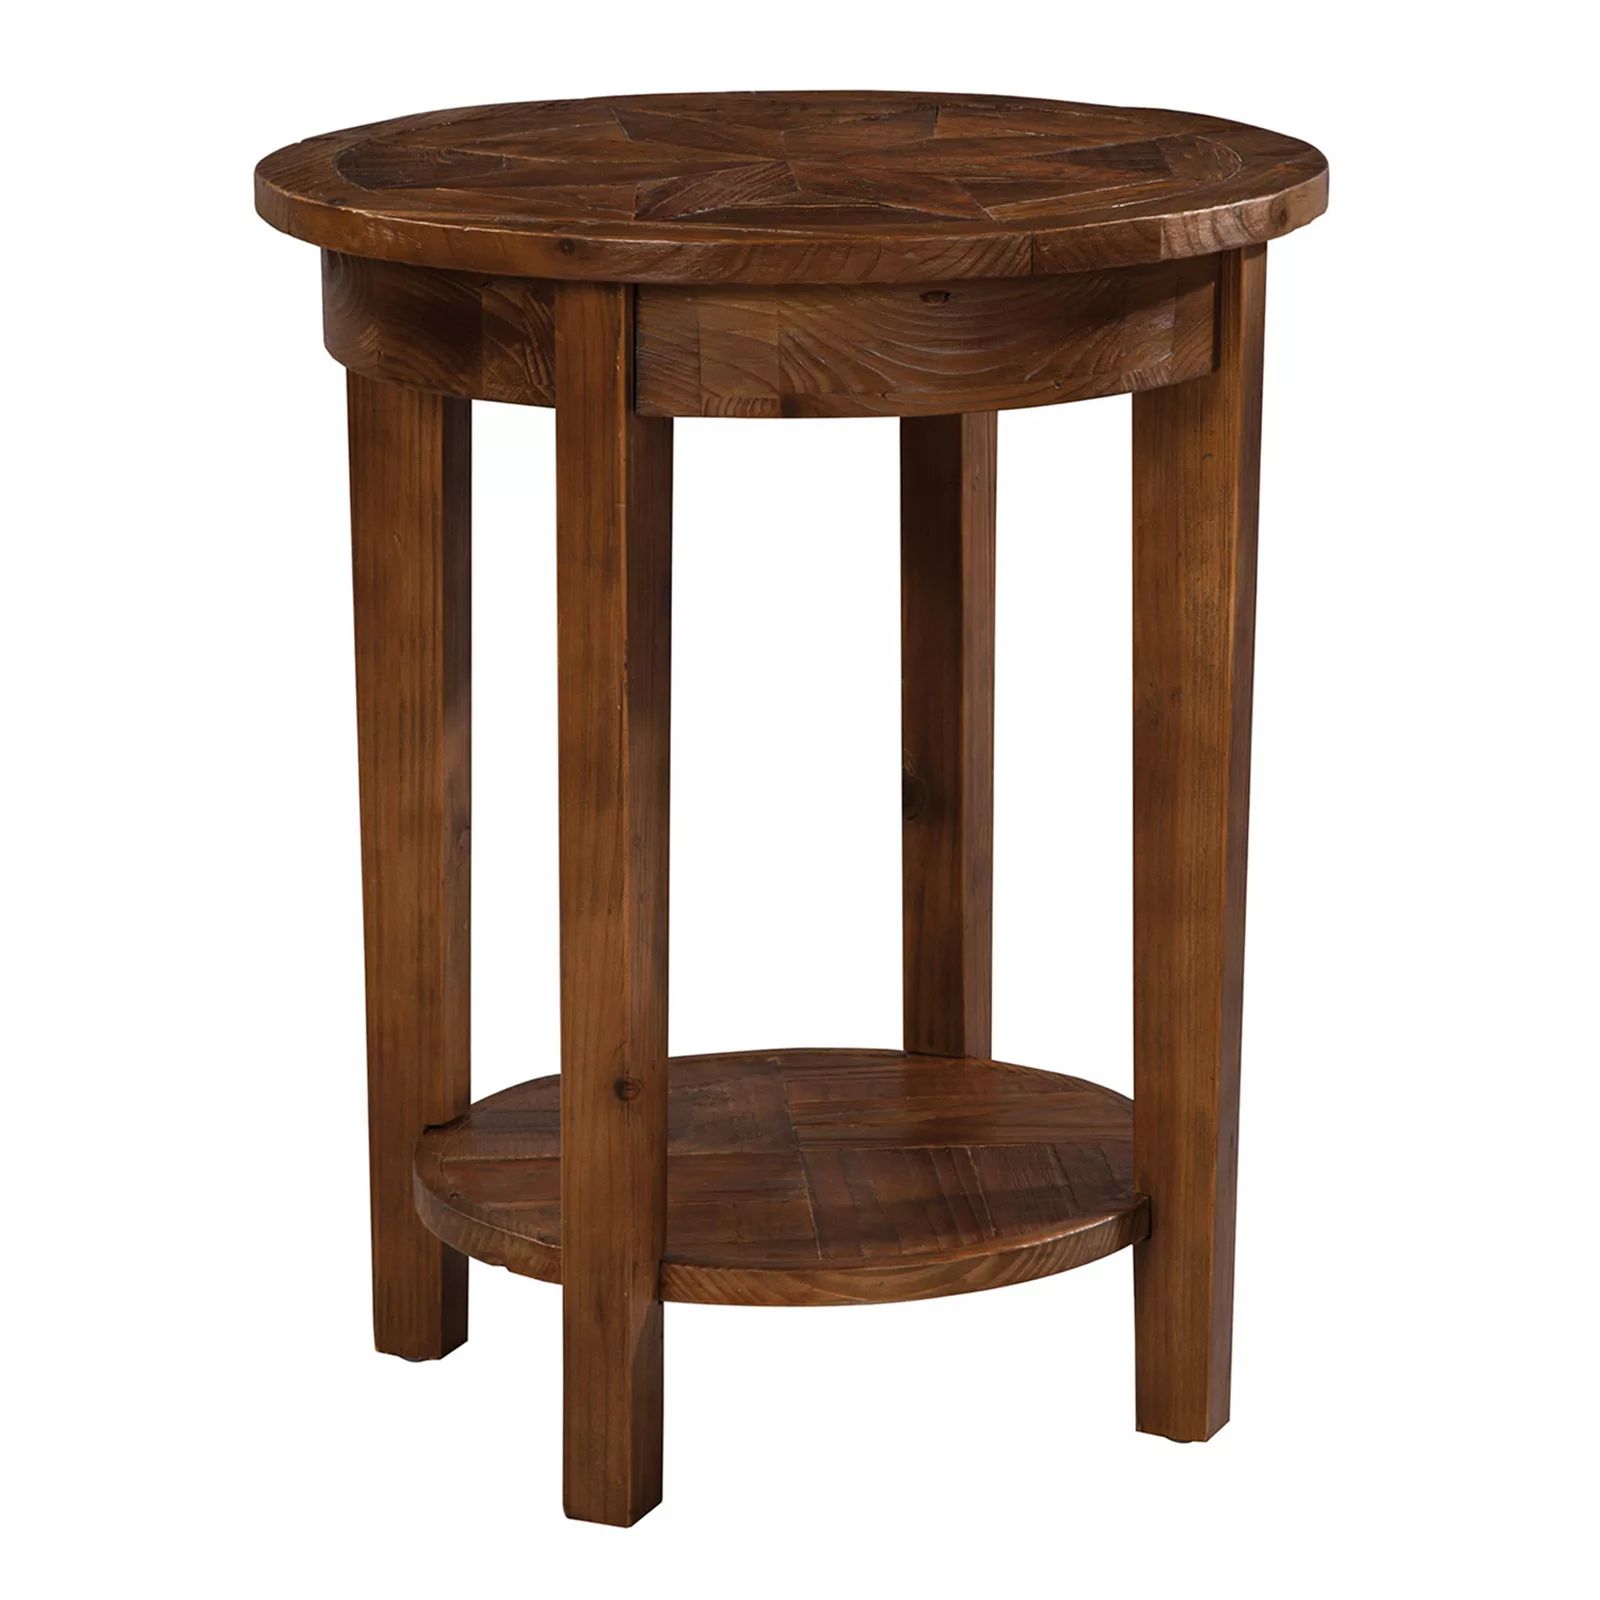 Alaterre Revive Reclaimed Wood Round End Table, Natural | Kohl's